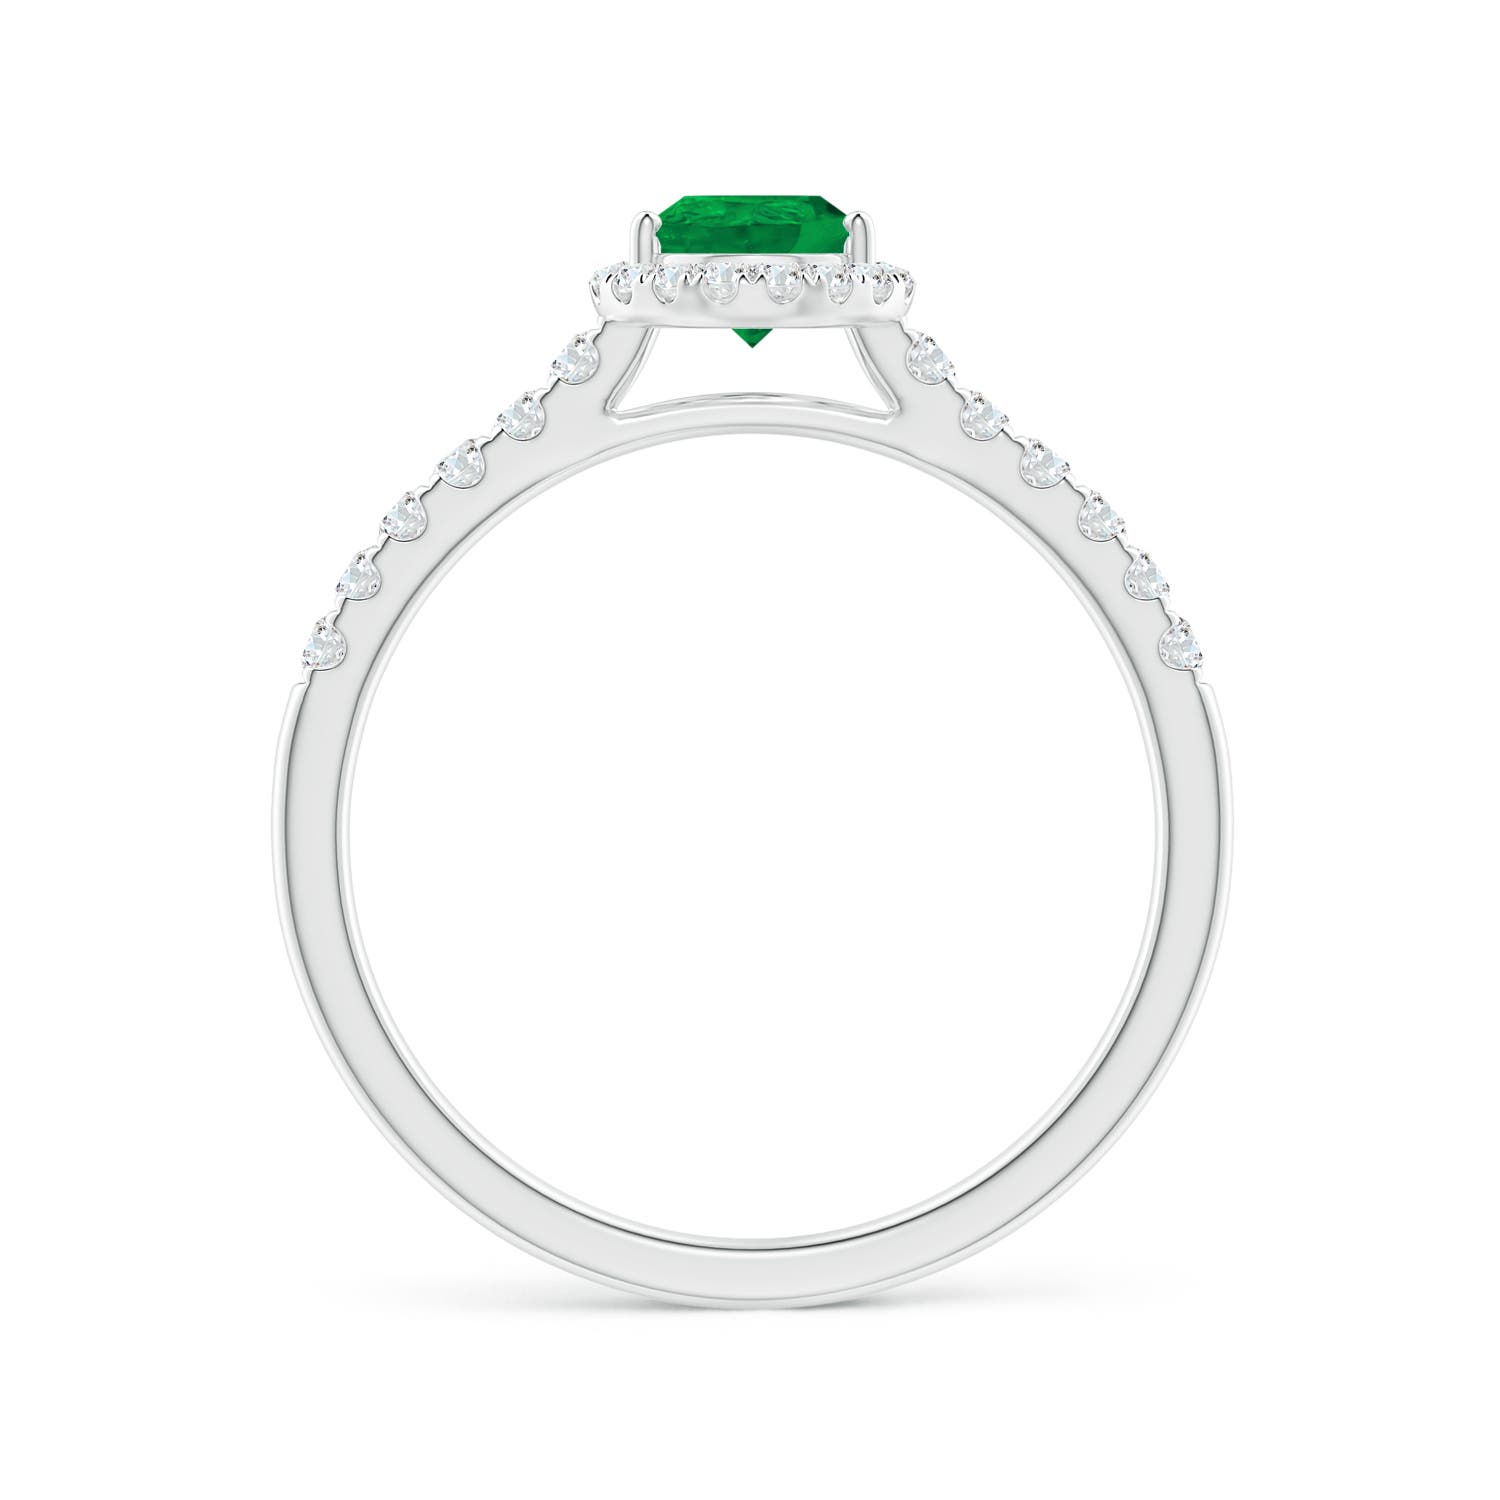 AA - Emerald / 0.88 CT / 14 KT White Gold